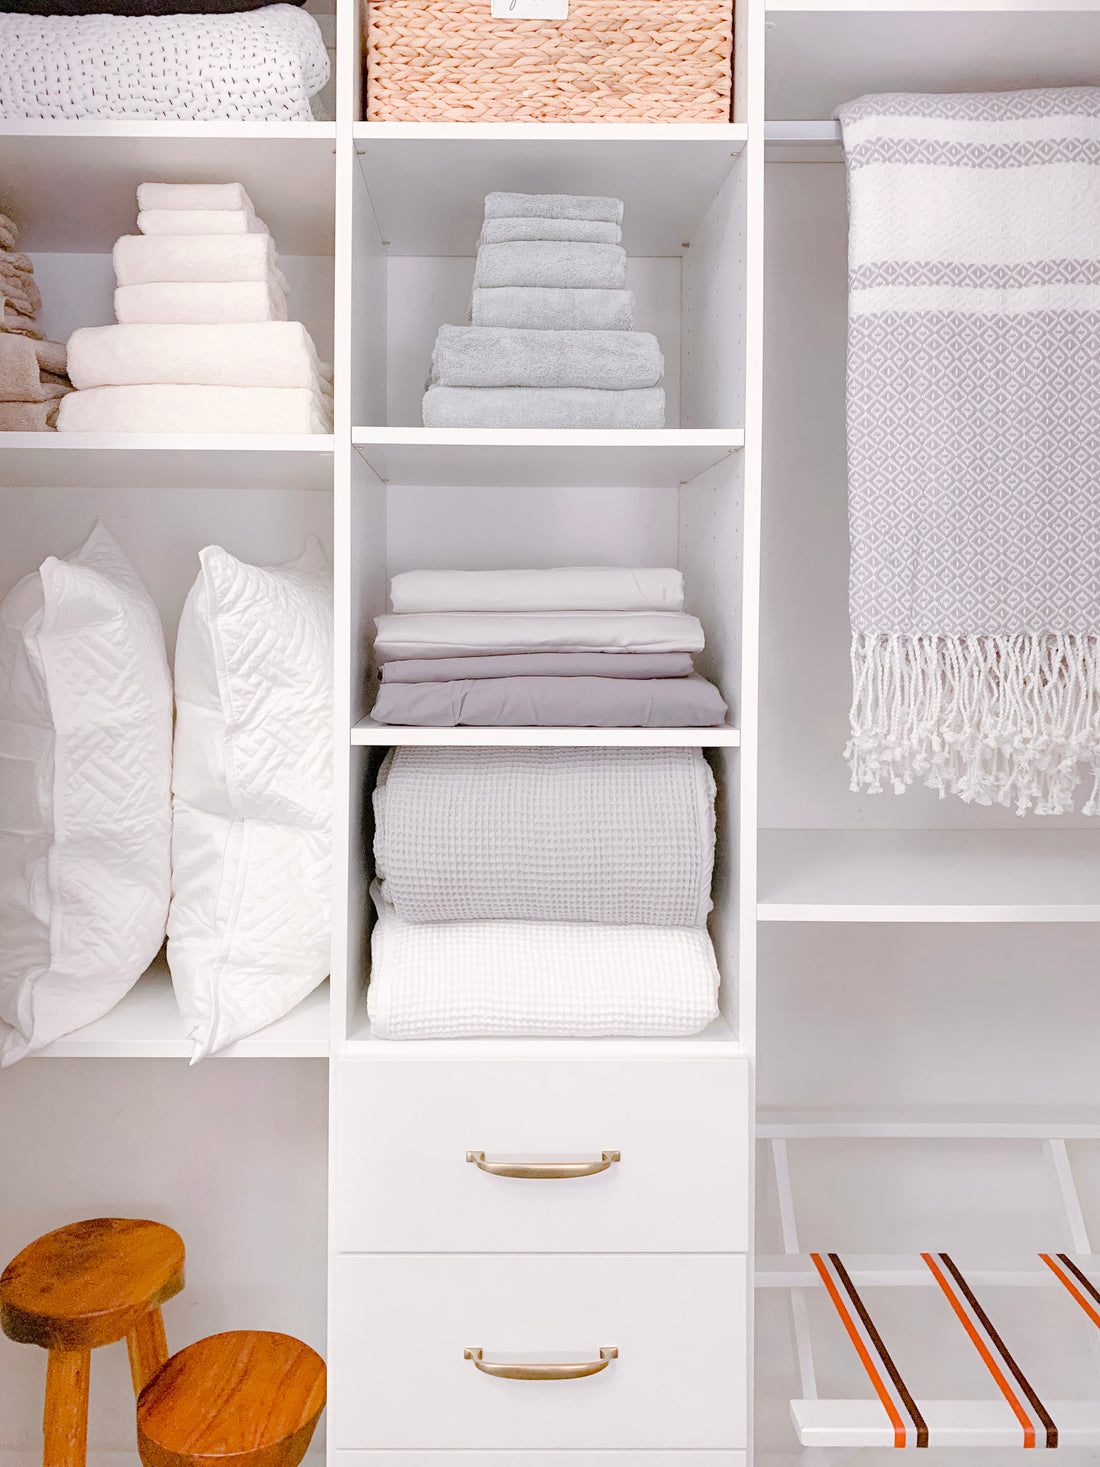 How to Fold Towels for a Neat and Organized Linen Closet